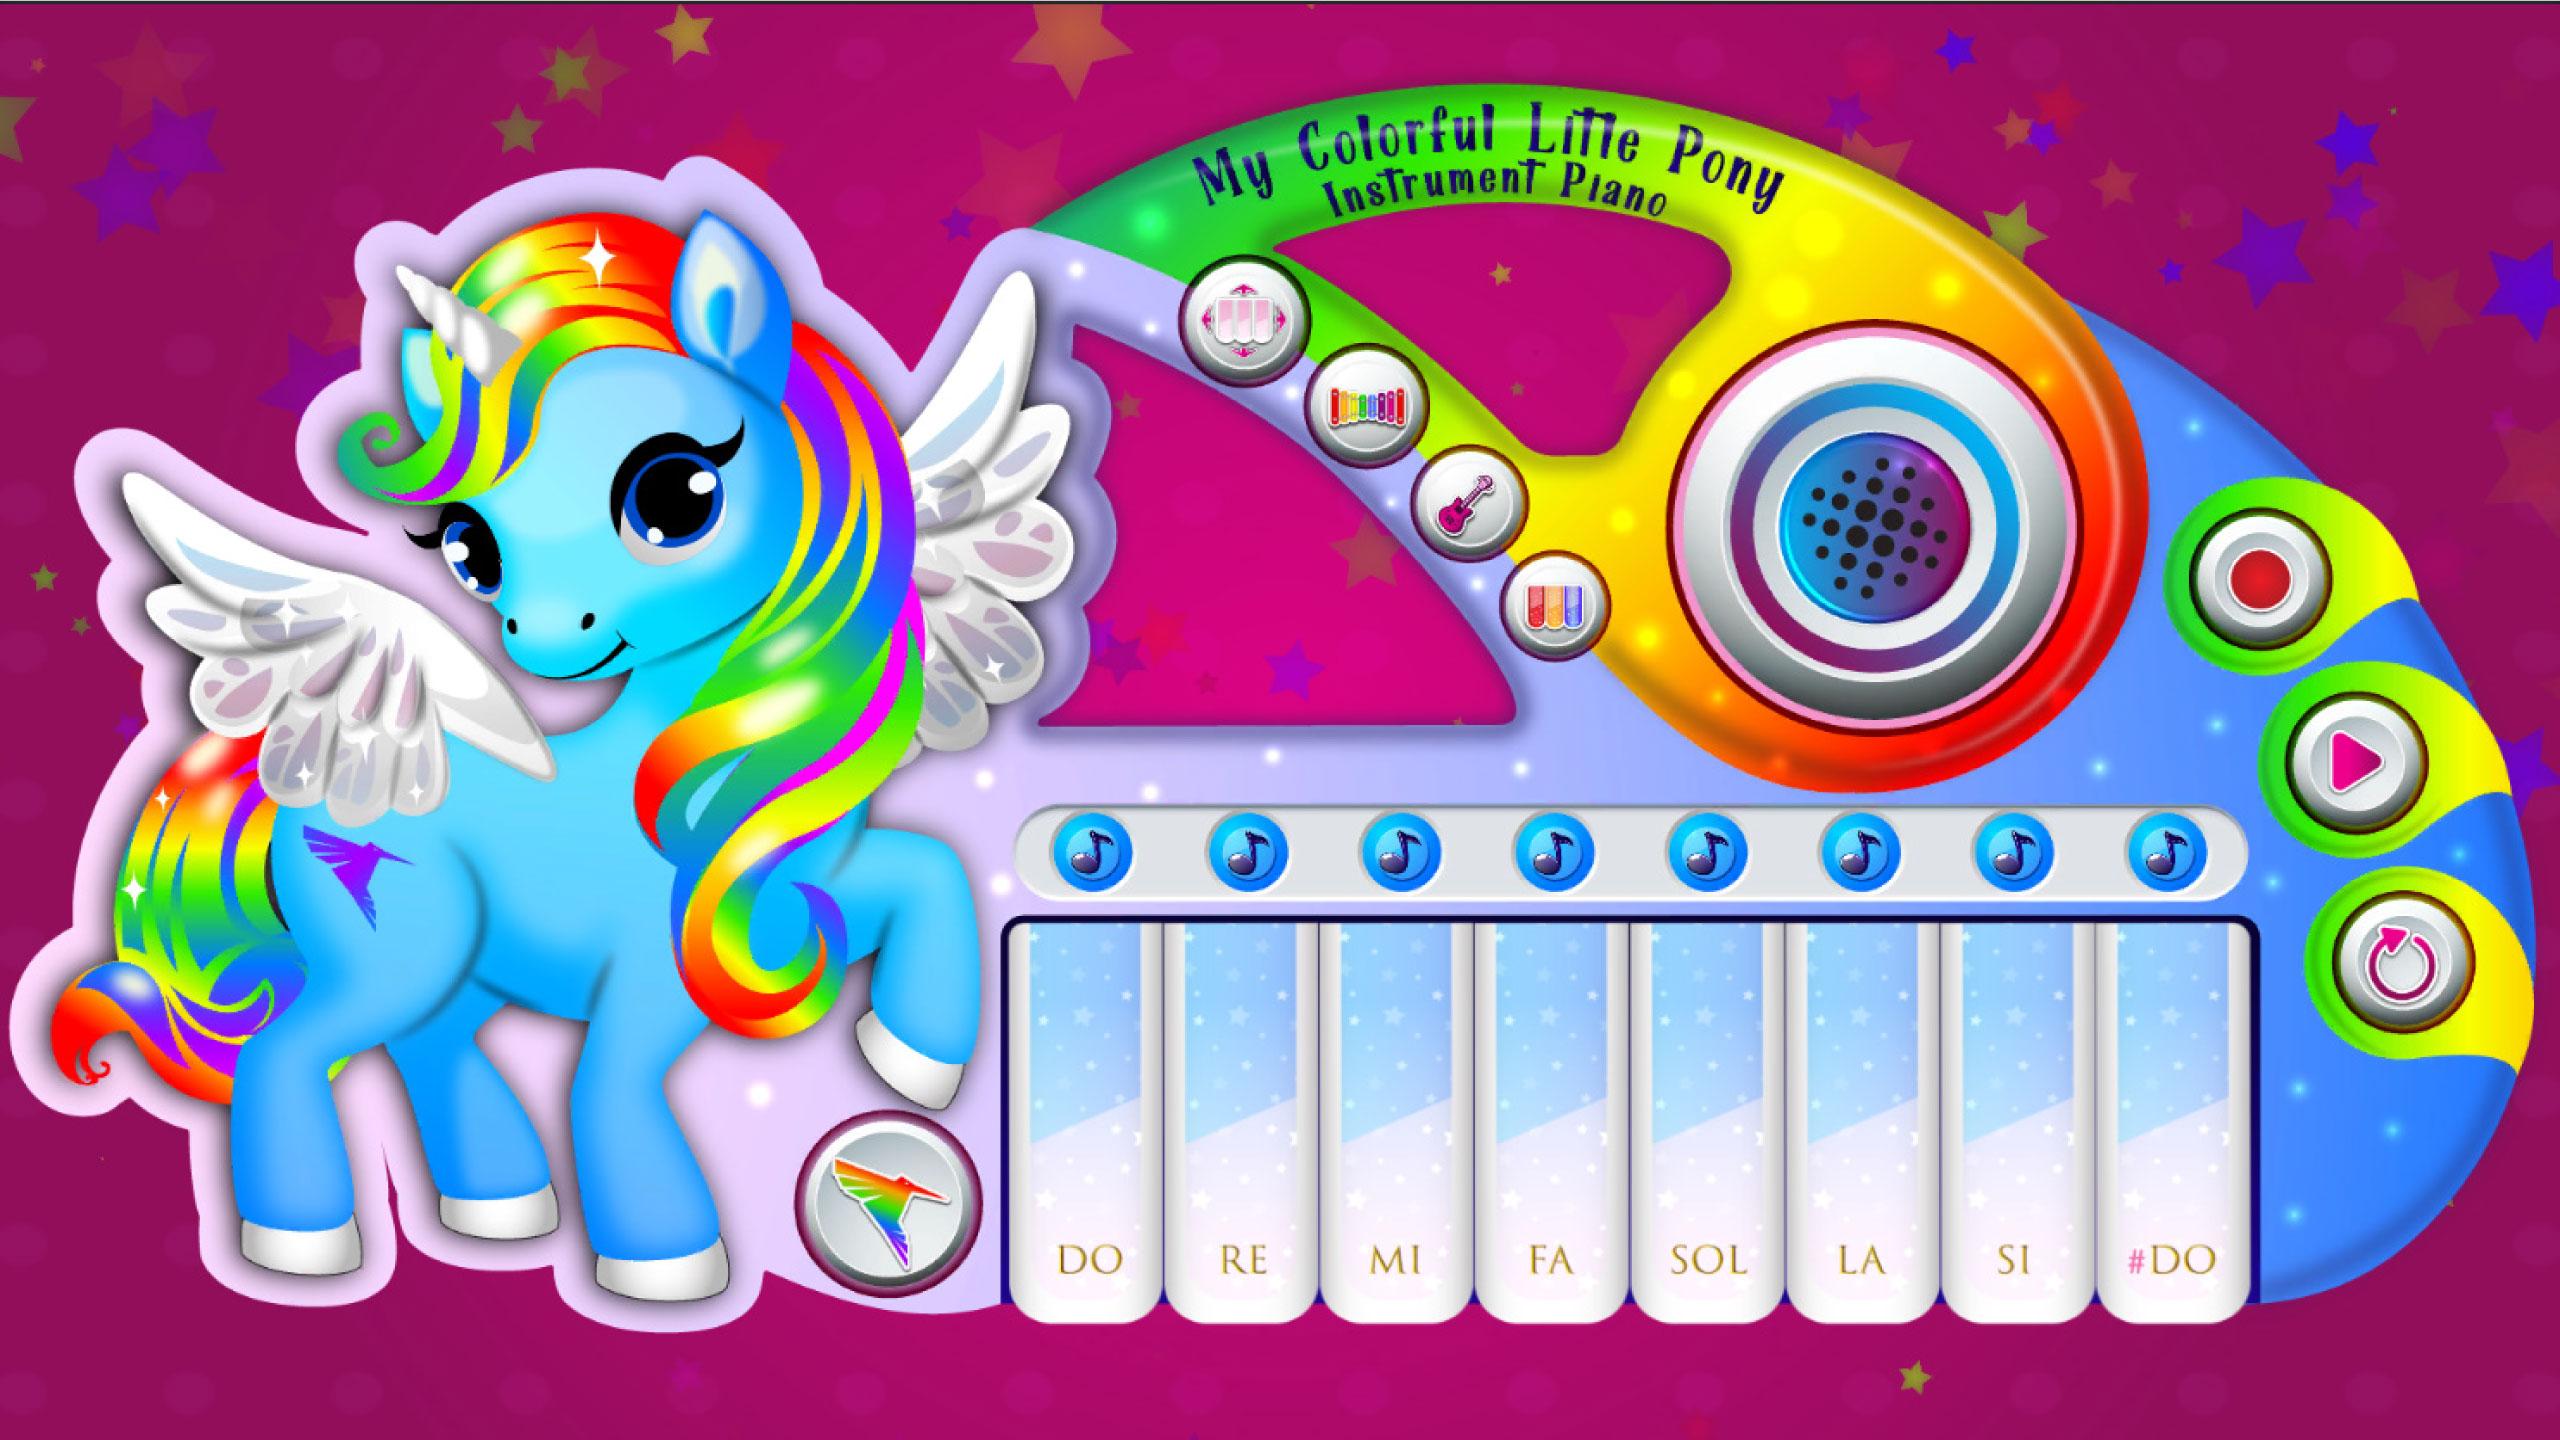 My Colorful Litle Pony Instrument - Piano 2.0 Screenshot 2